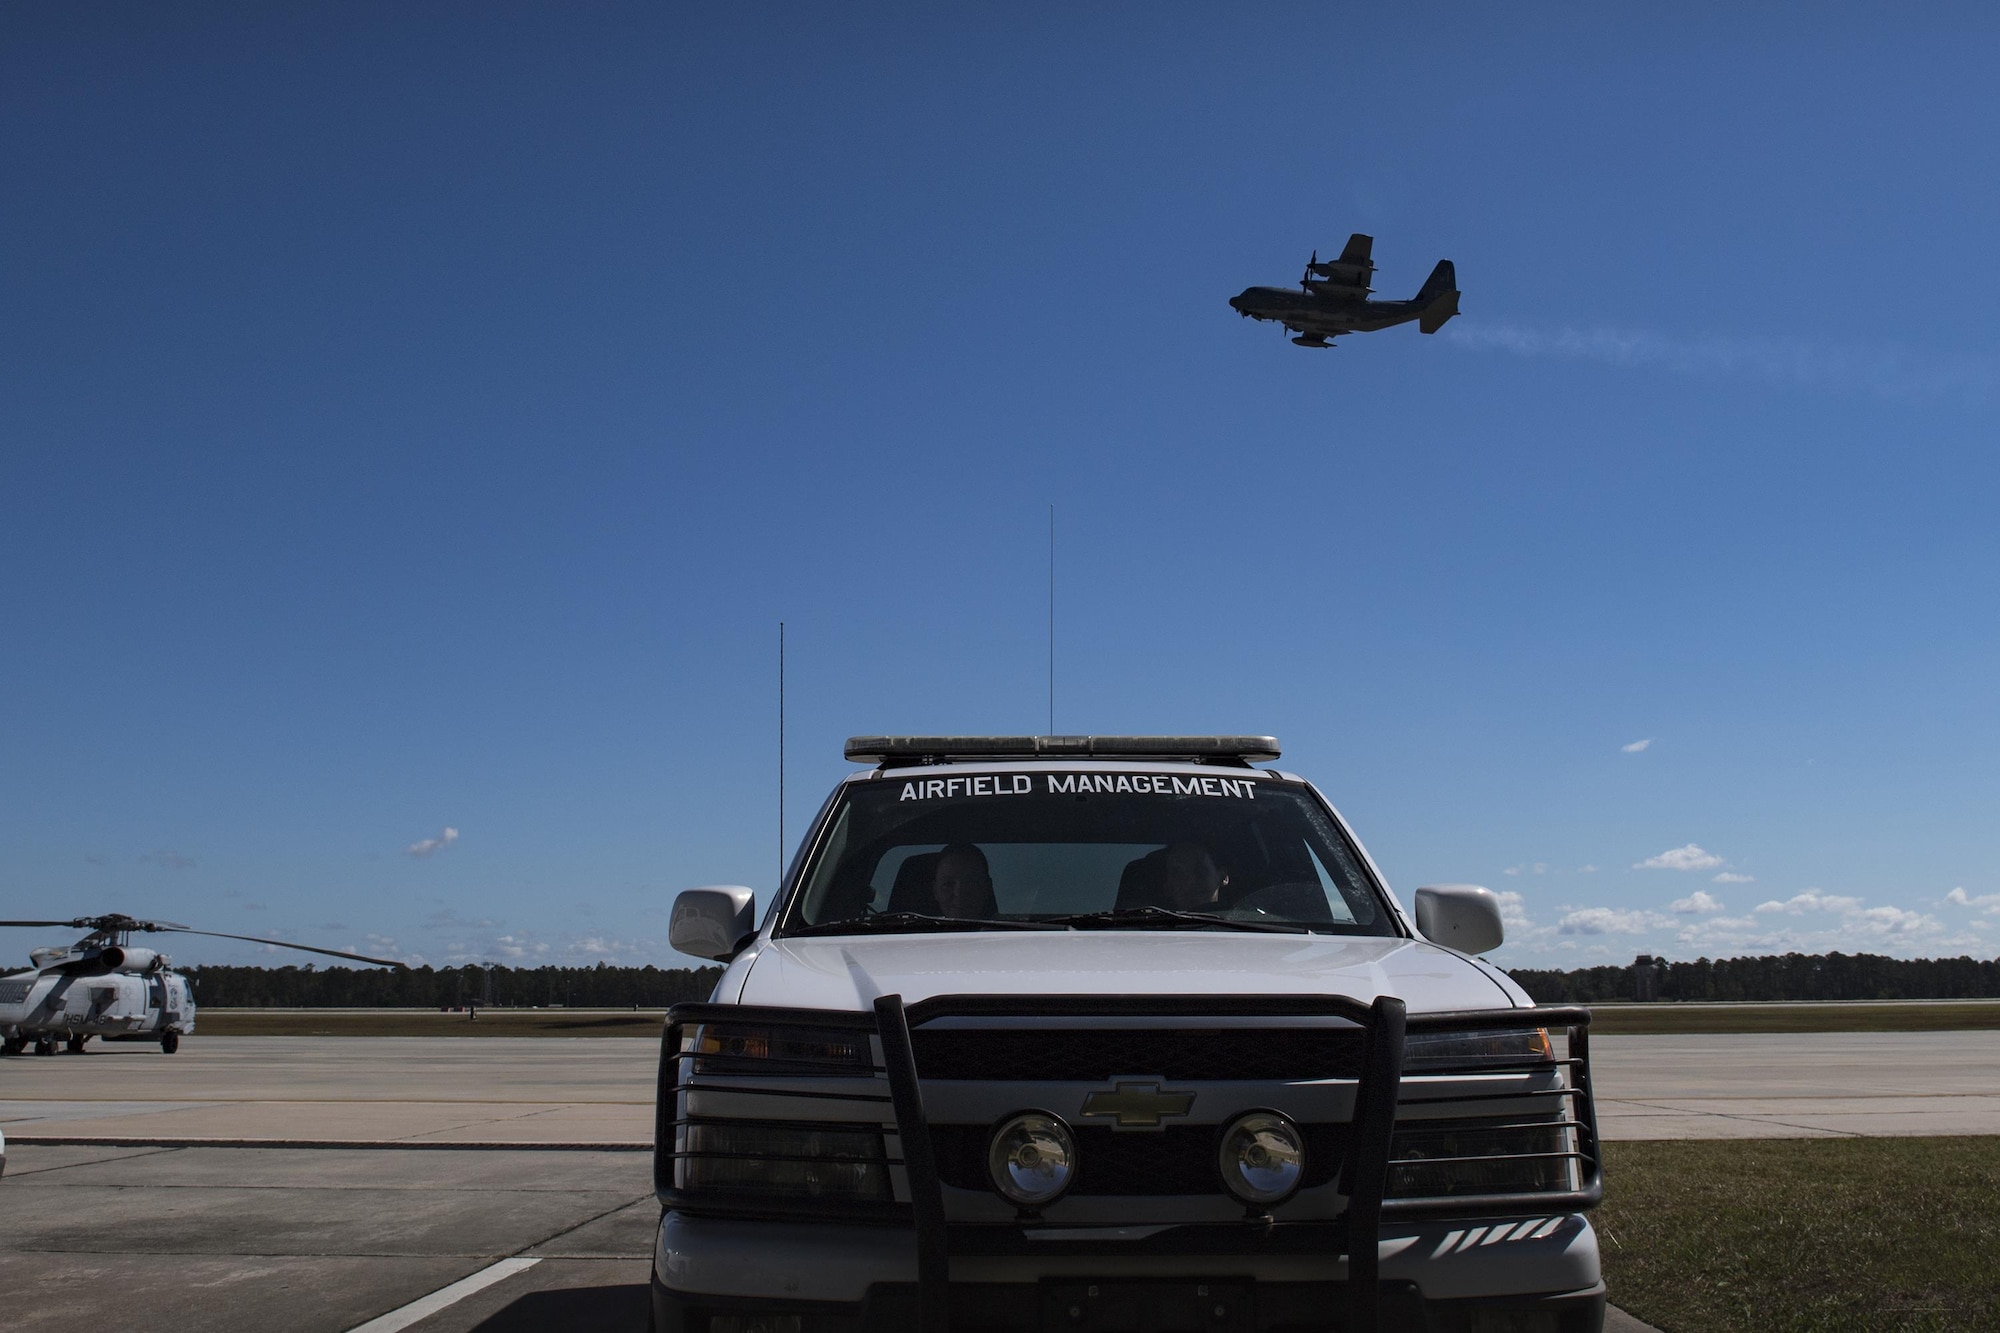 Tech. Sgt. Shannon Walsh, left, 23d Operations Support Squadron NCO in charge of airfield management operations and Senior Airman Kelsey Seroogy, 23d OSS airfield management shift leader, park their truck after a routine driven inspection while an HC-130J Combat King II ascends in the background, Oct. 19, 2016, at Moody Air Force Base, Ga. It’s safe to say anytime an aircraft is seen in Moody’s skies, members of airfield management are manning their stations. (U.S. Air Force photo by Airman 1st Class Daniel Snider)